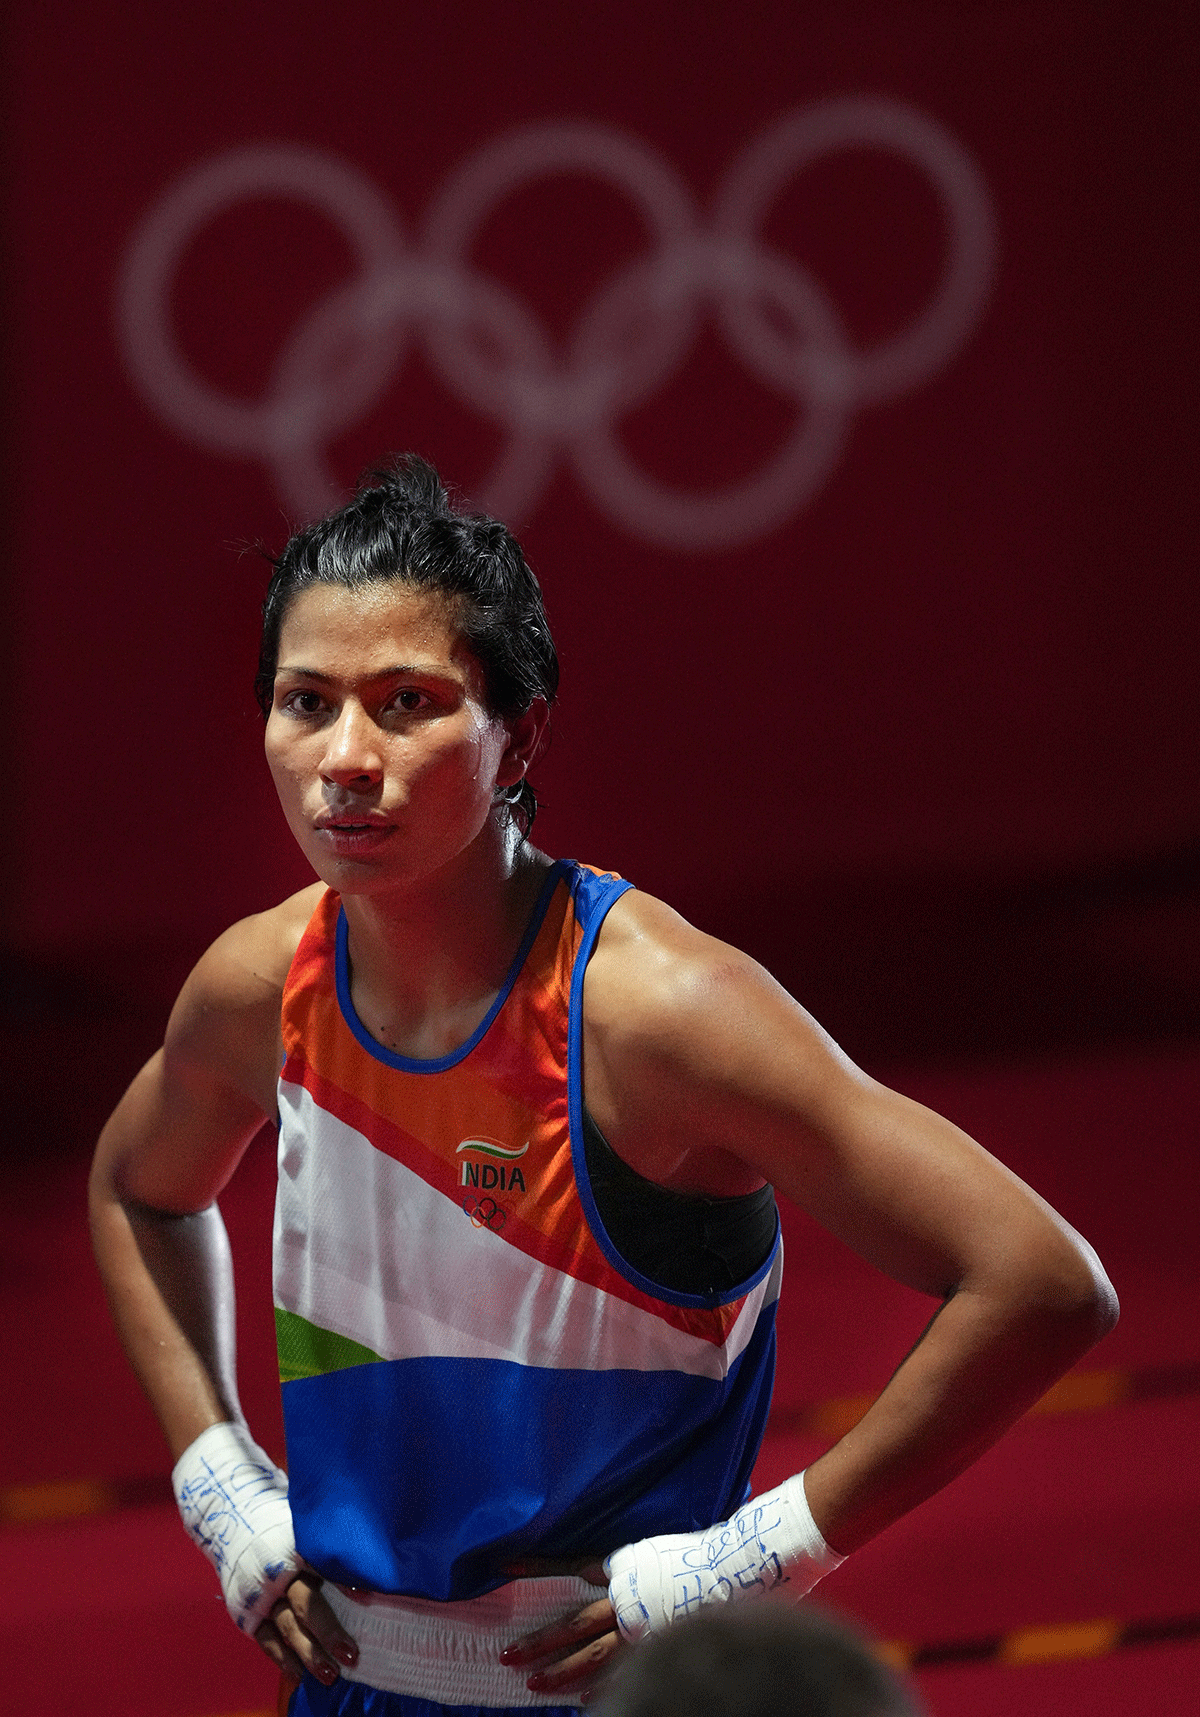 The build-up to the Olympics was a rough one for Lovlina Borgohain, who missed a training trip to Europe last year after contracting COVID-19. Then her mother Mamoni, underwent a kidney transplant while the boxer was at a national camp in Delhi in 2020.